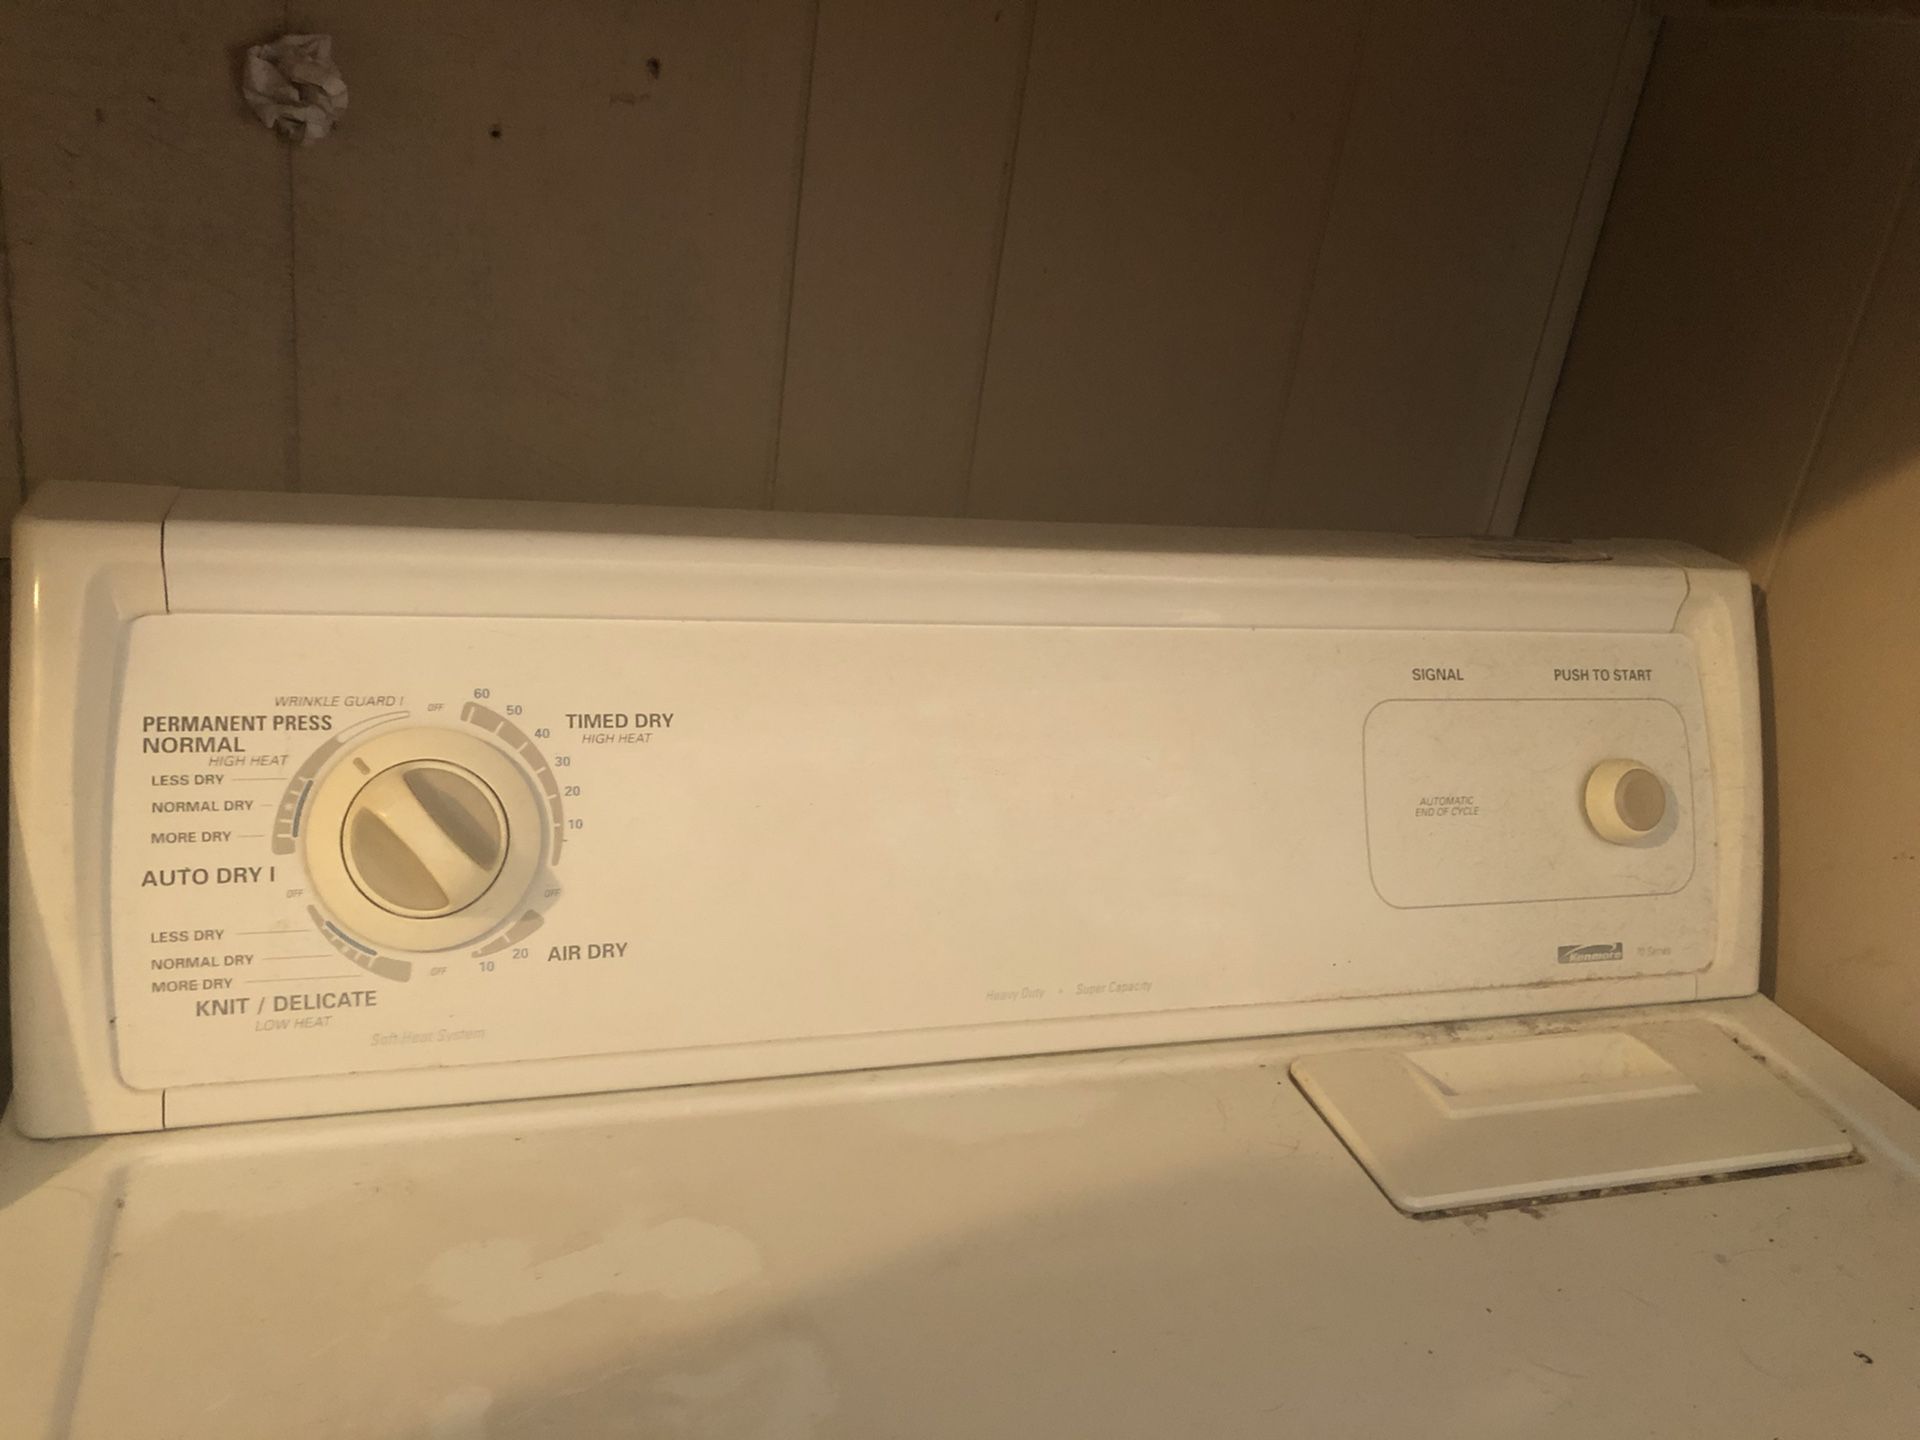 Gently used Washer and dryer